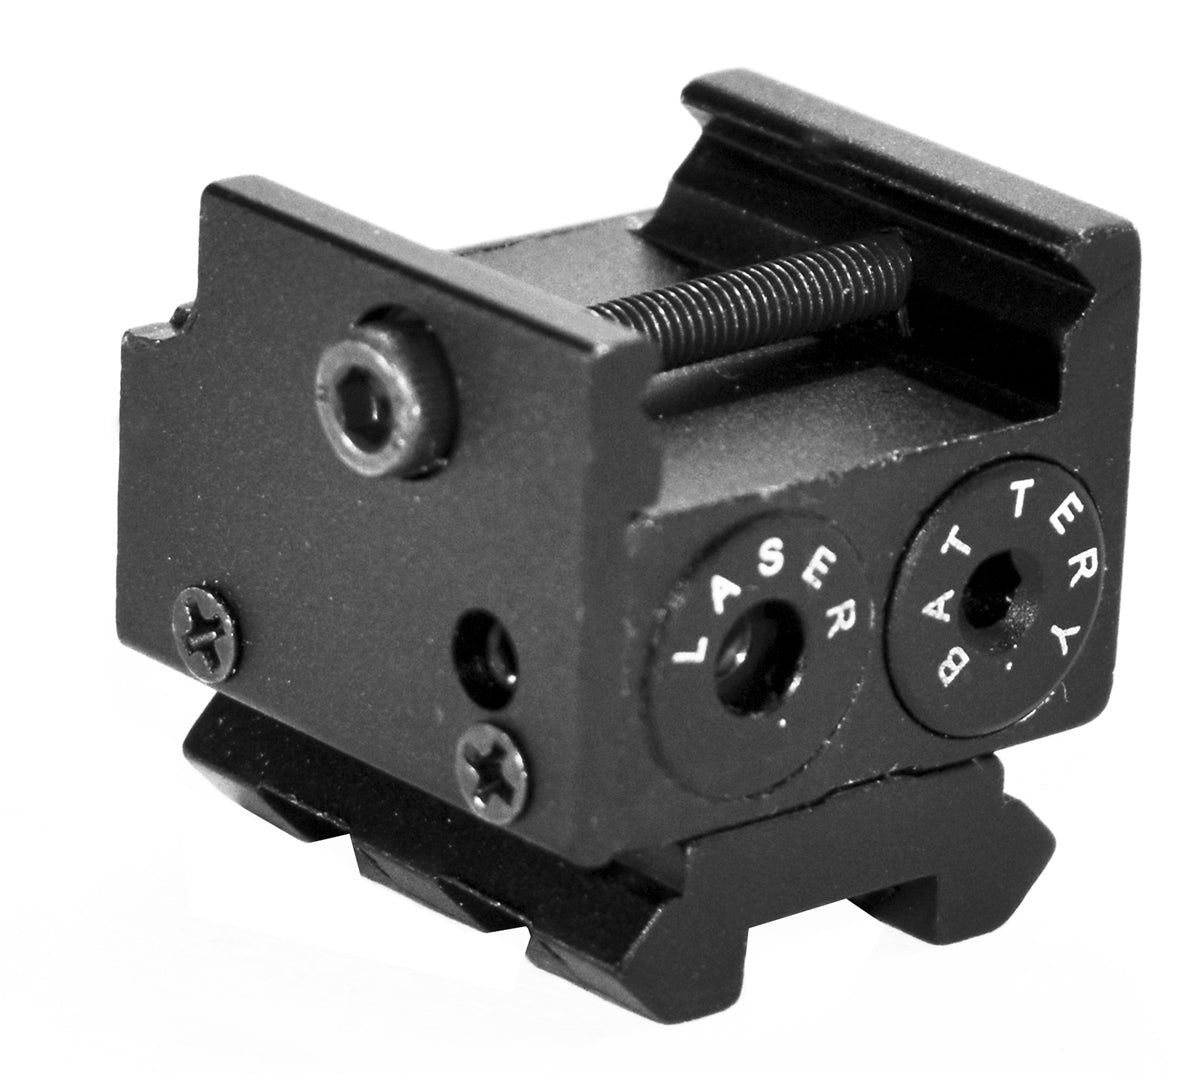 Trinity red dot sight for Keltec pmr 30 accessories aluminum upgrades black.